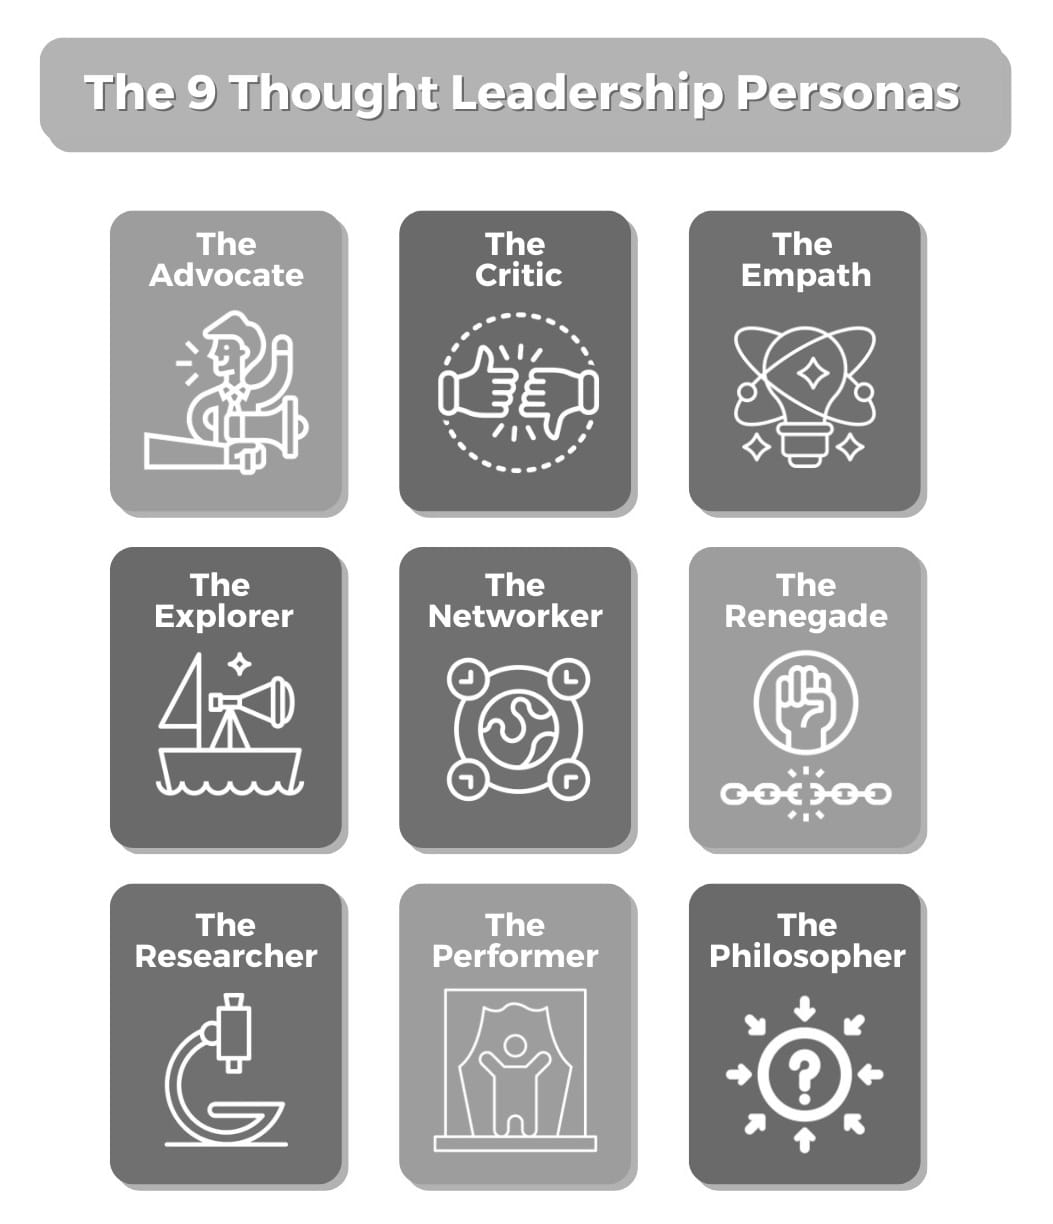 What's Your Thought Leader Persona?